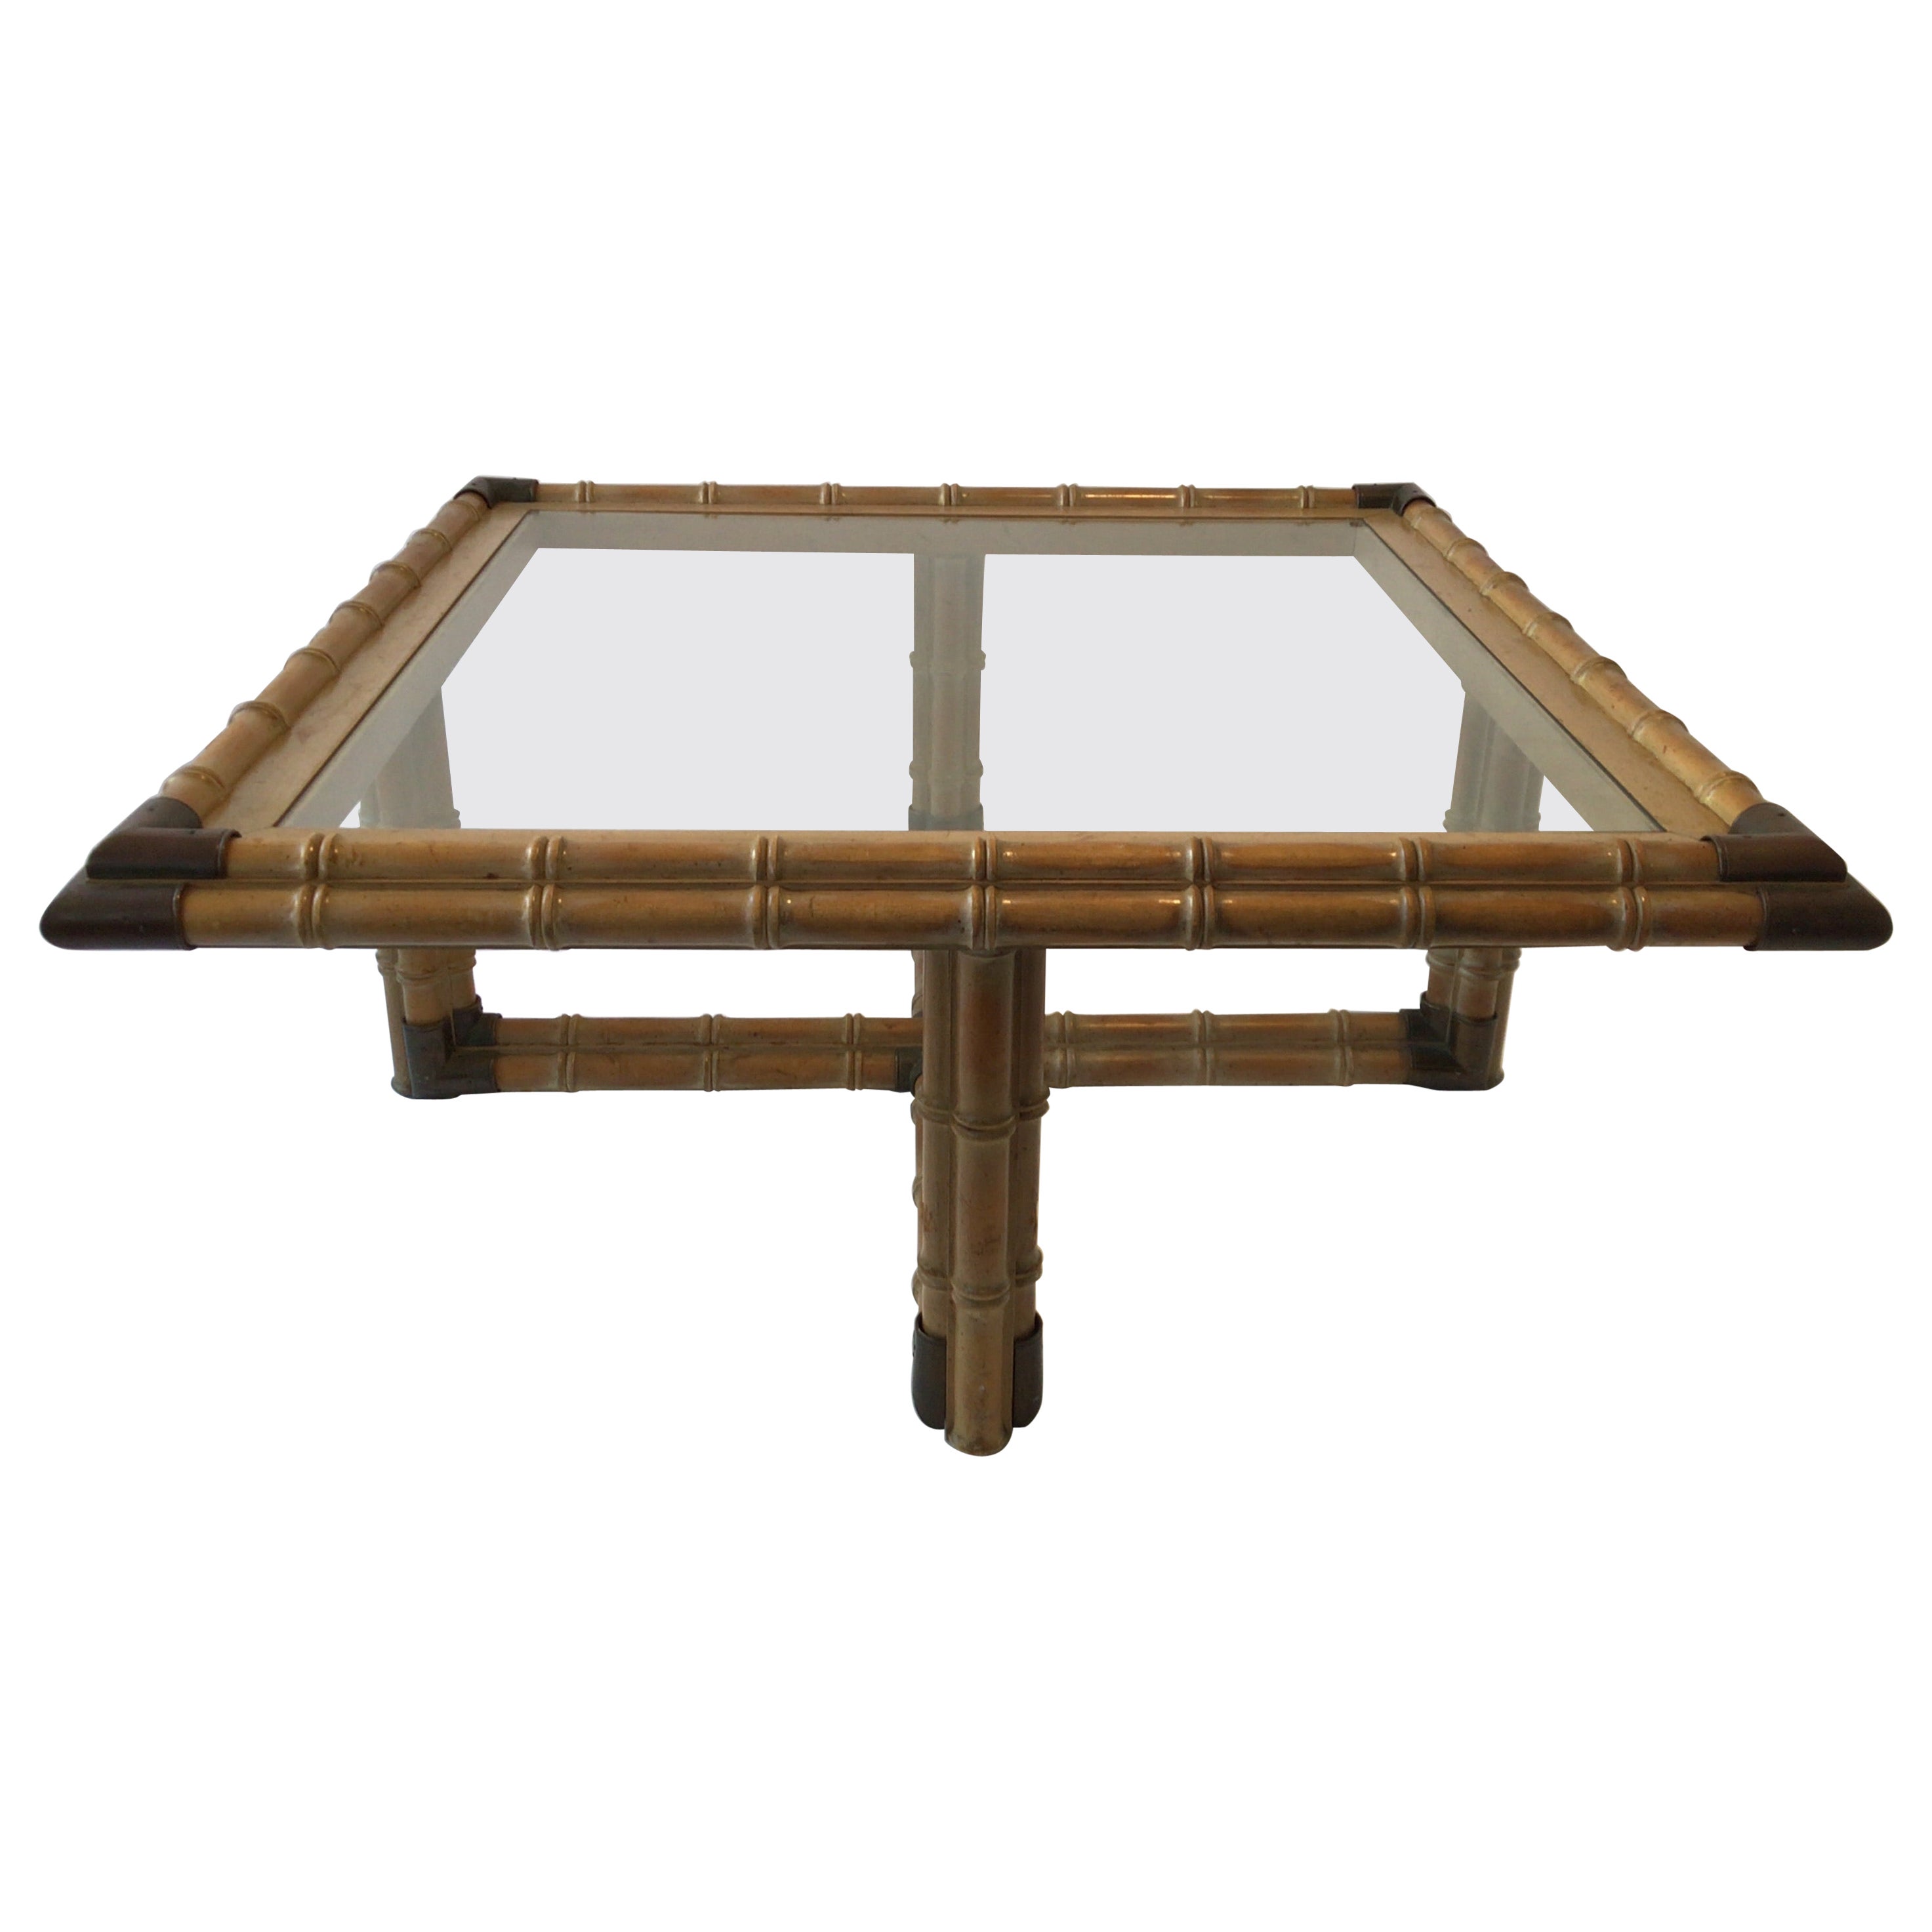 1960s Square Faux Bamboo Wood Coffee Table with Brass Accents Glass Top For Sale